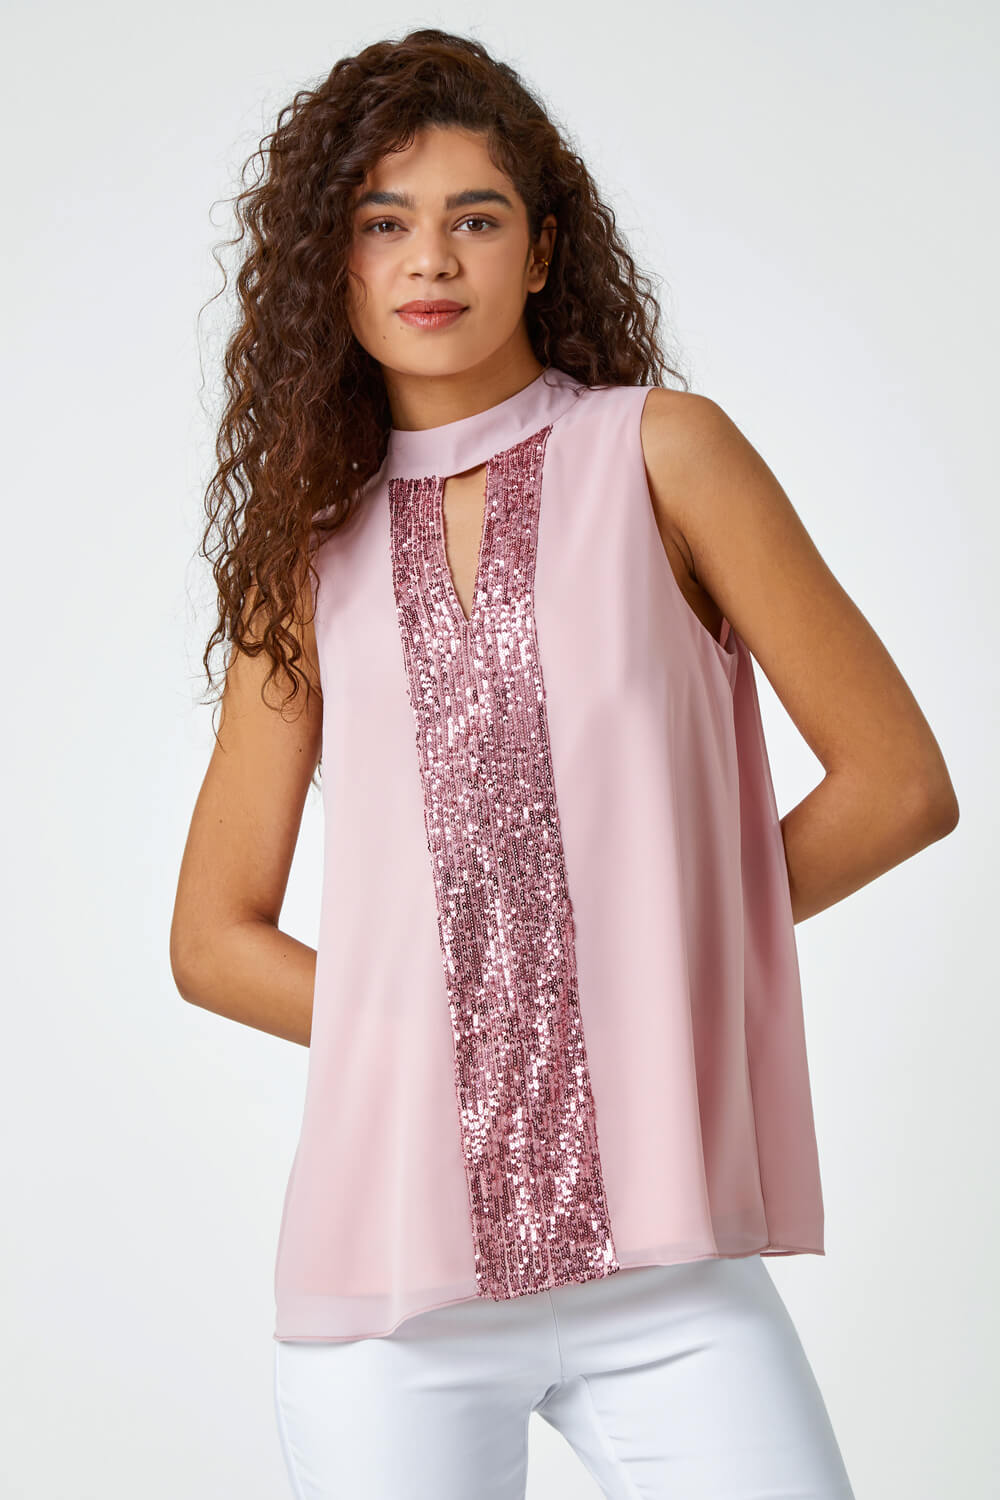 Rose Sleeveless High Neck Sequin Top , Image 2 of 5